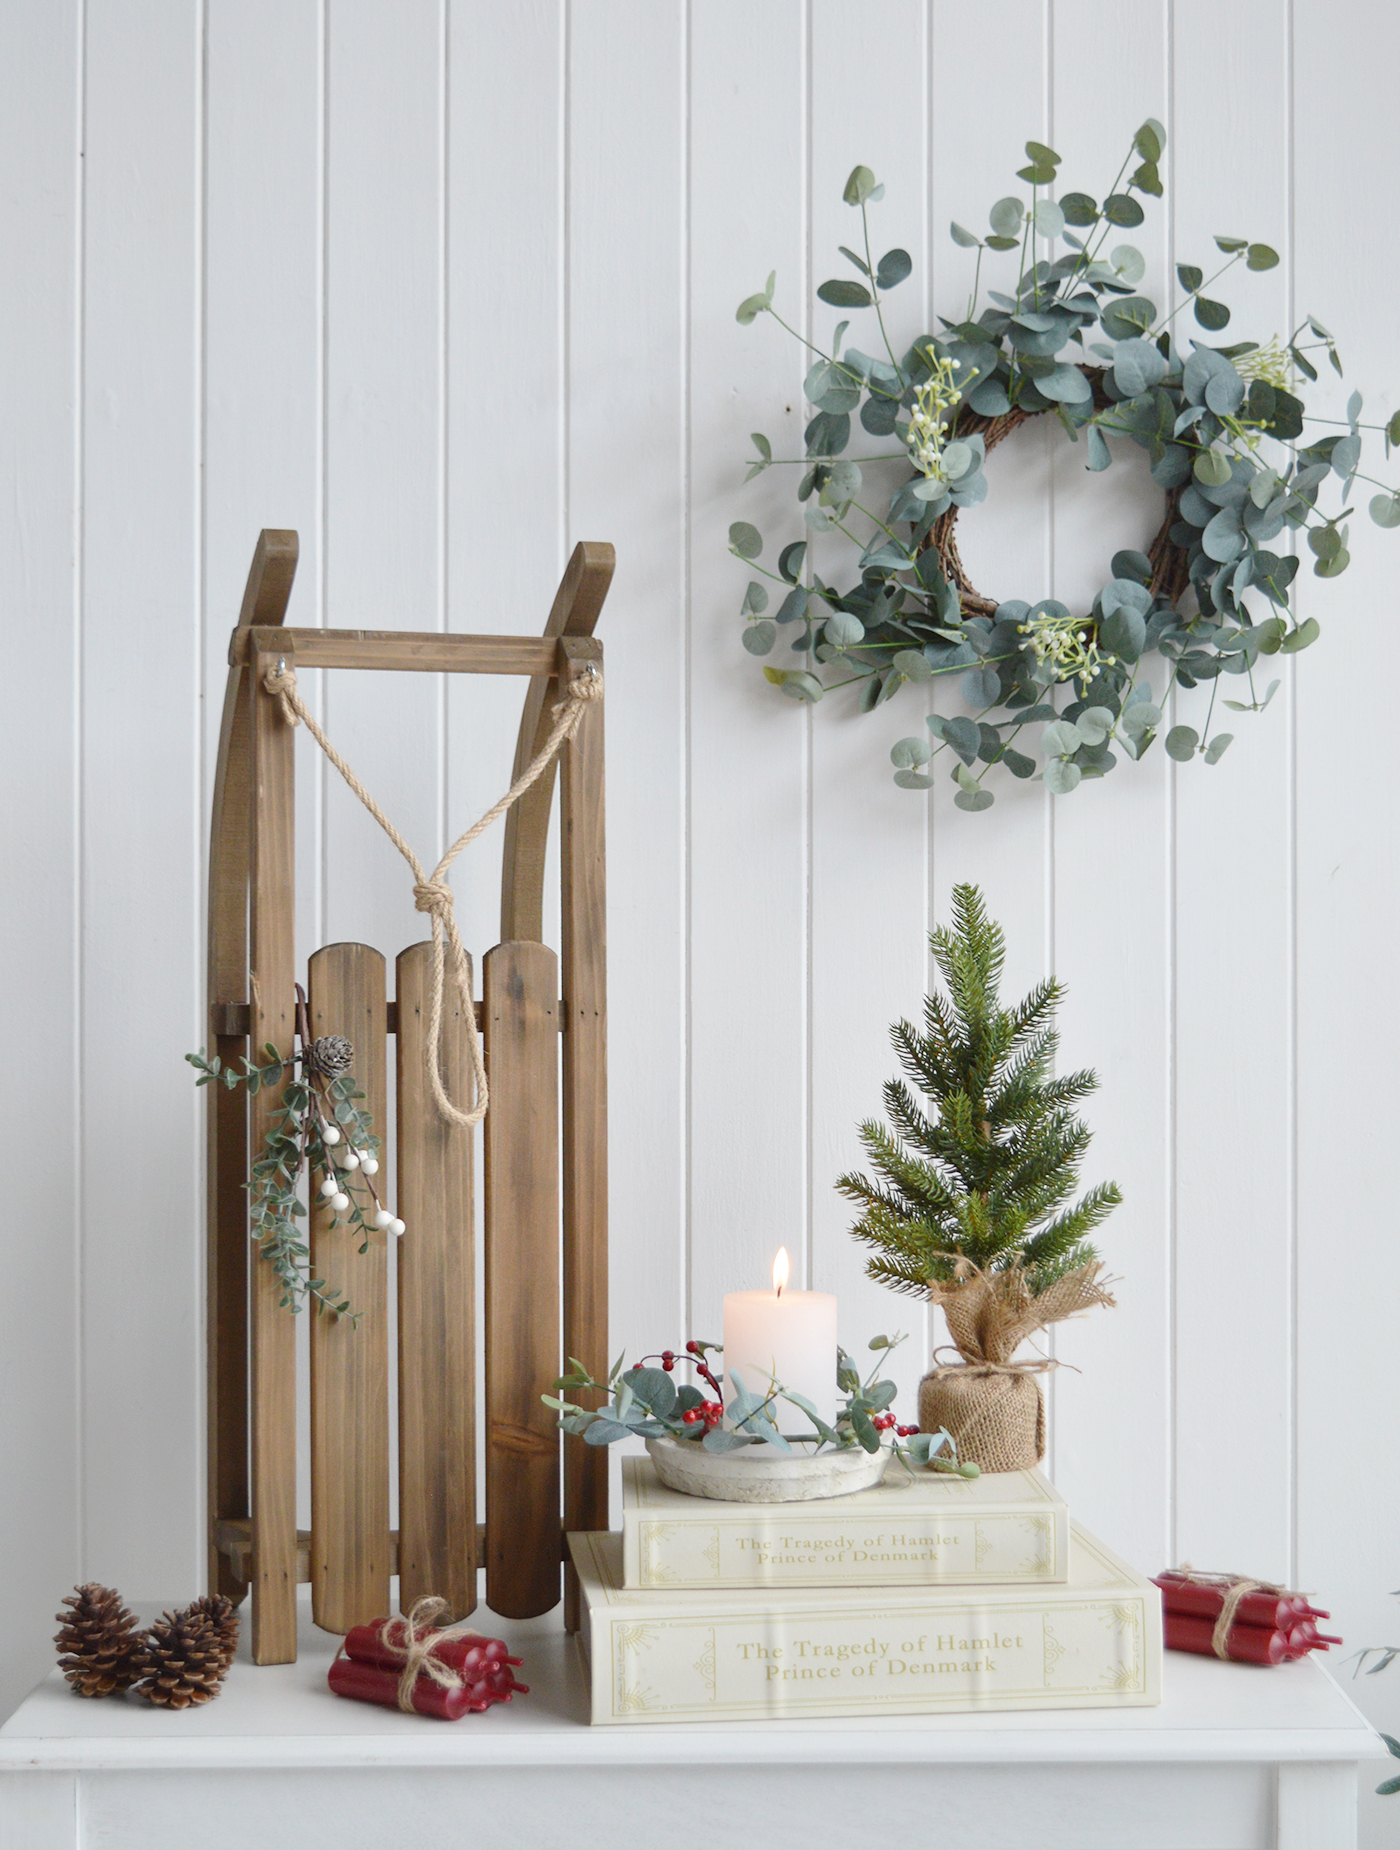 The Decorative wooden sleigh for New England coastal and country style Christmas Decor